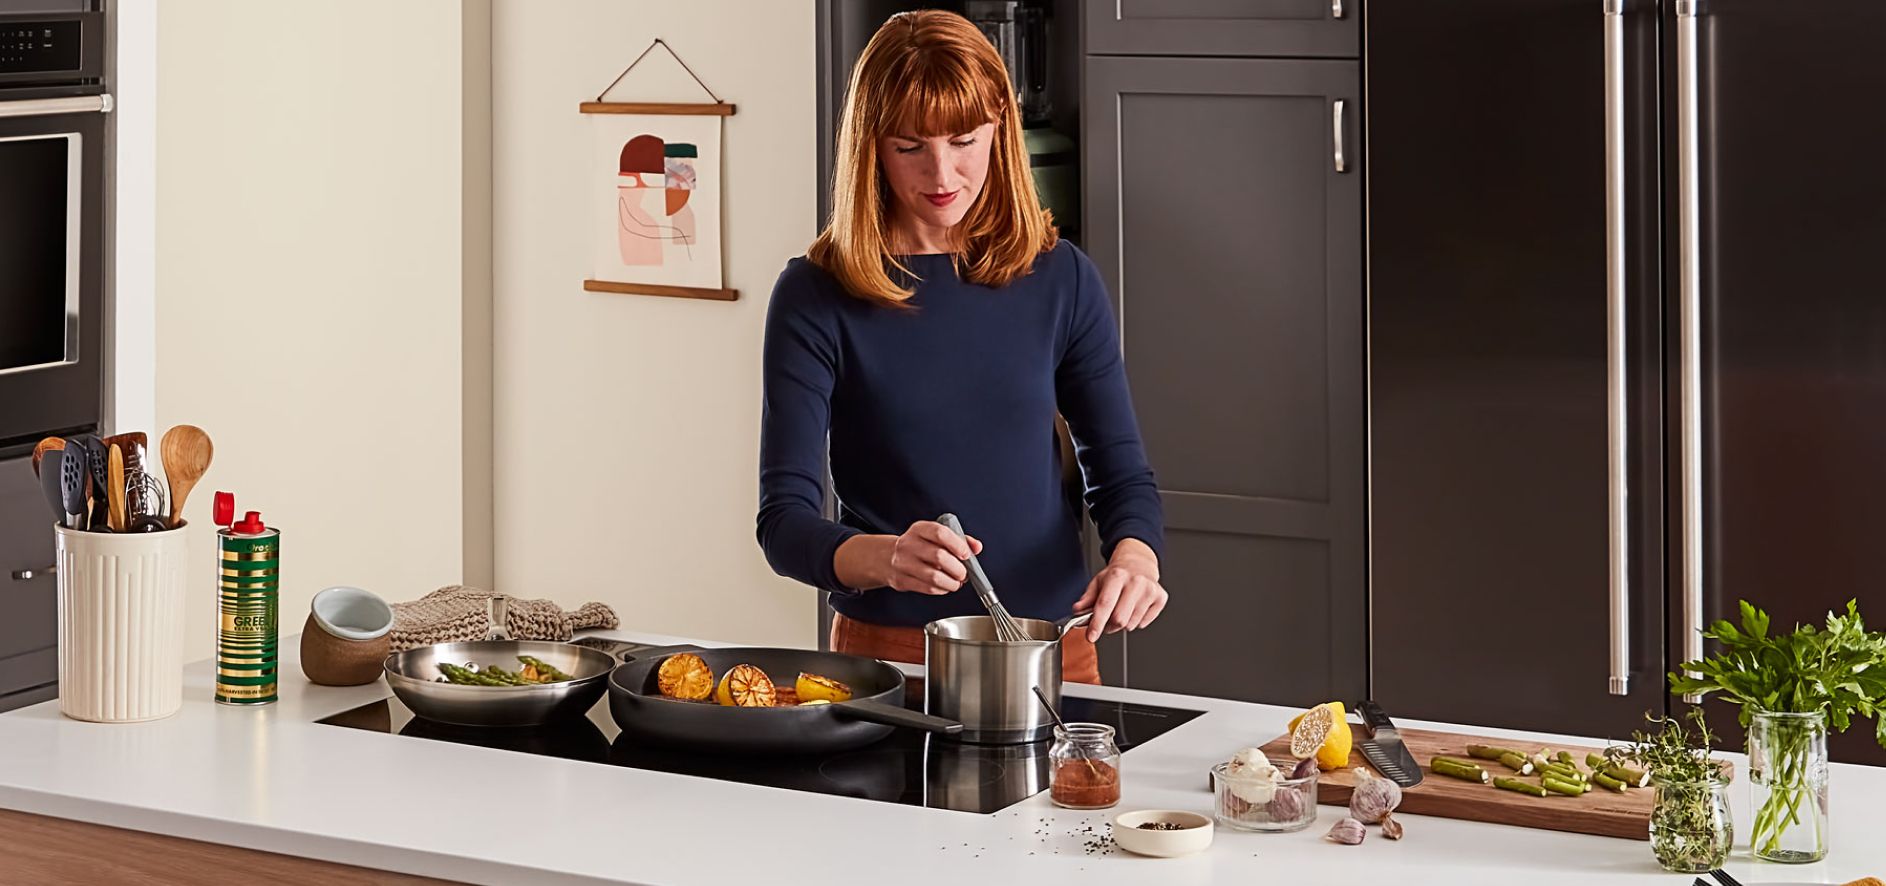 Woman cooking using an induction cooktop